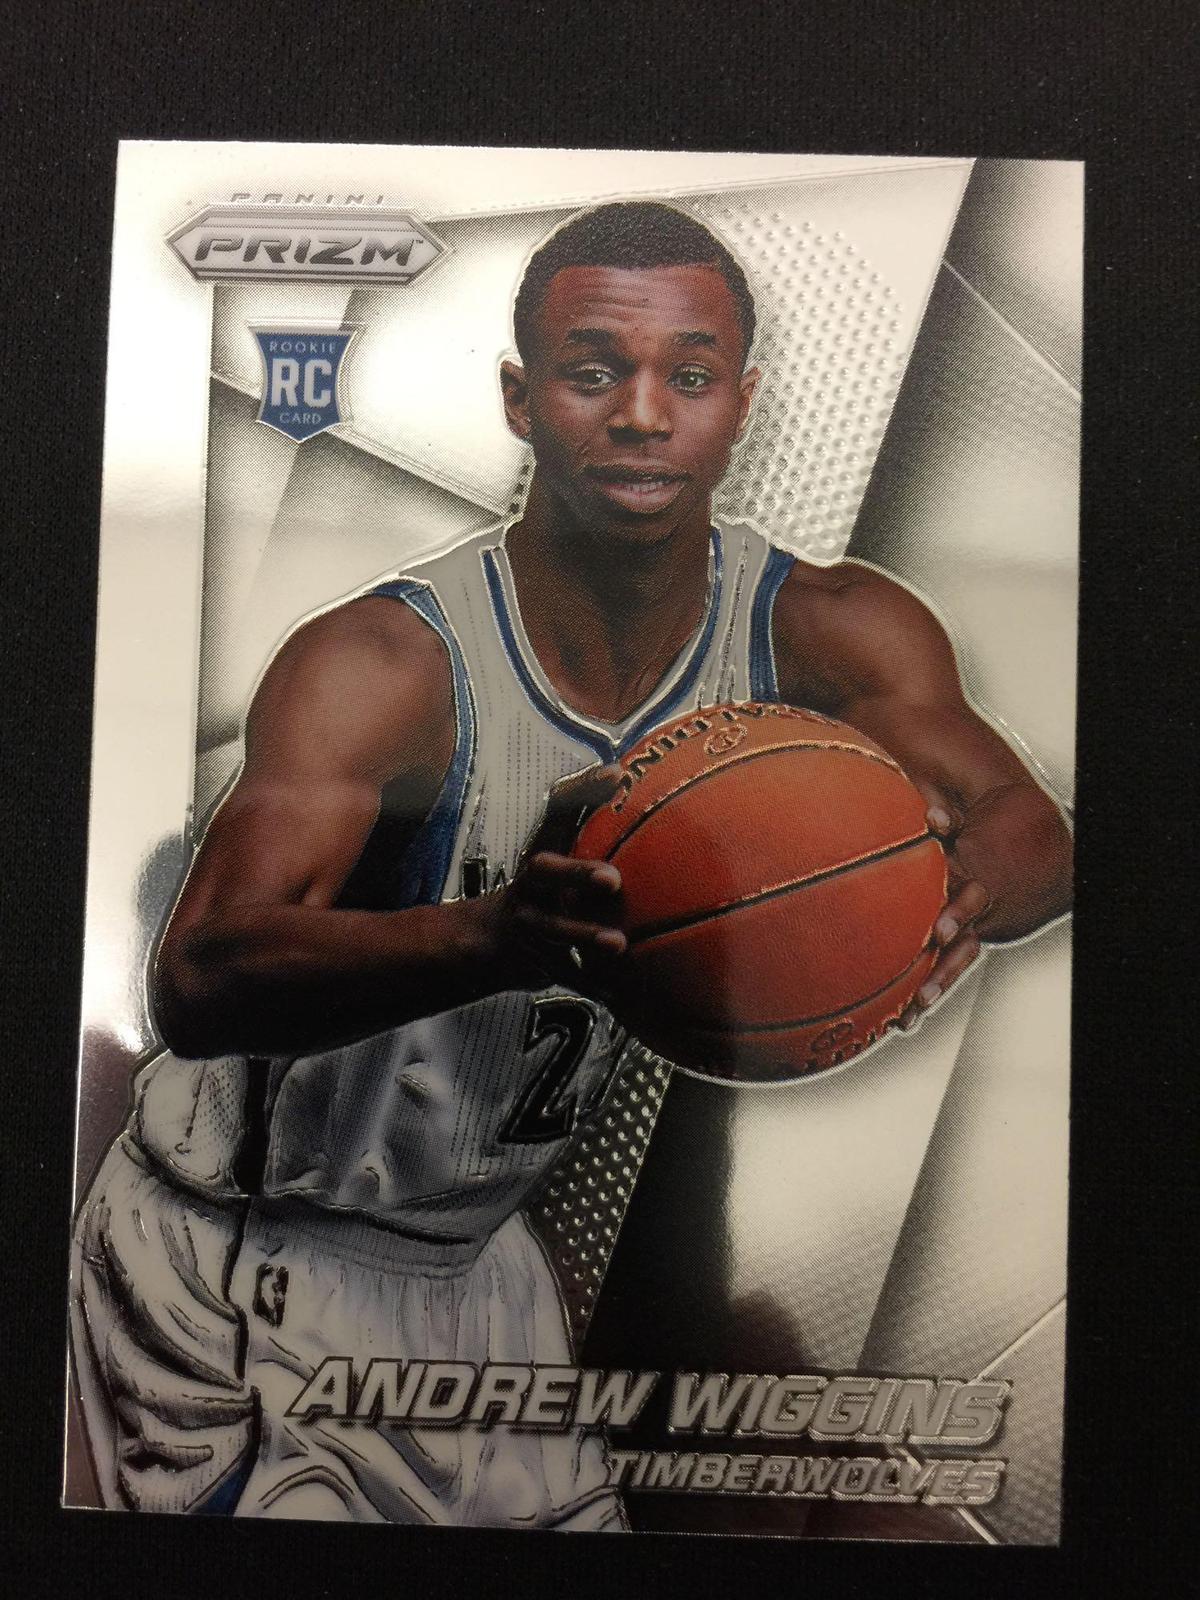 2014-15 Panini Prizm Andrew Wiggins Wolves Rookie Basketball Card